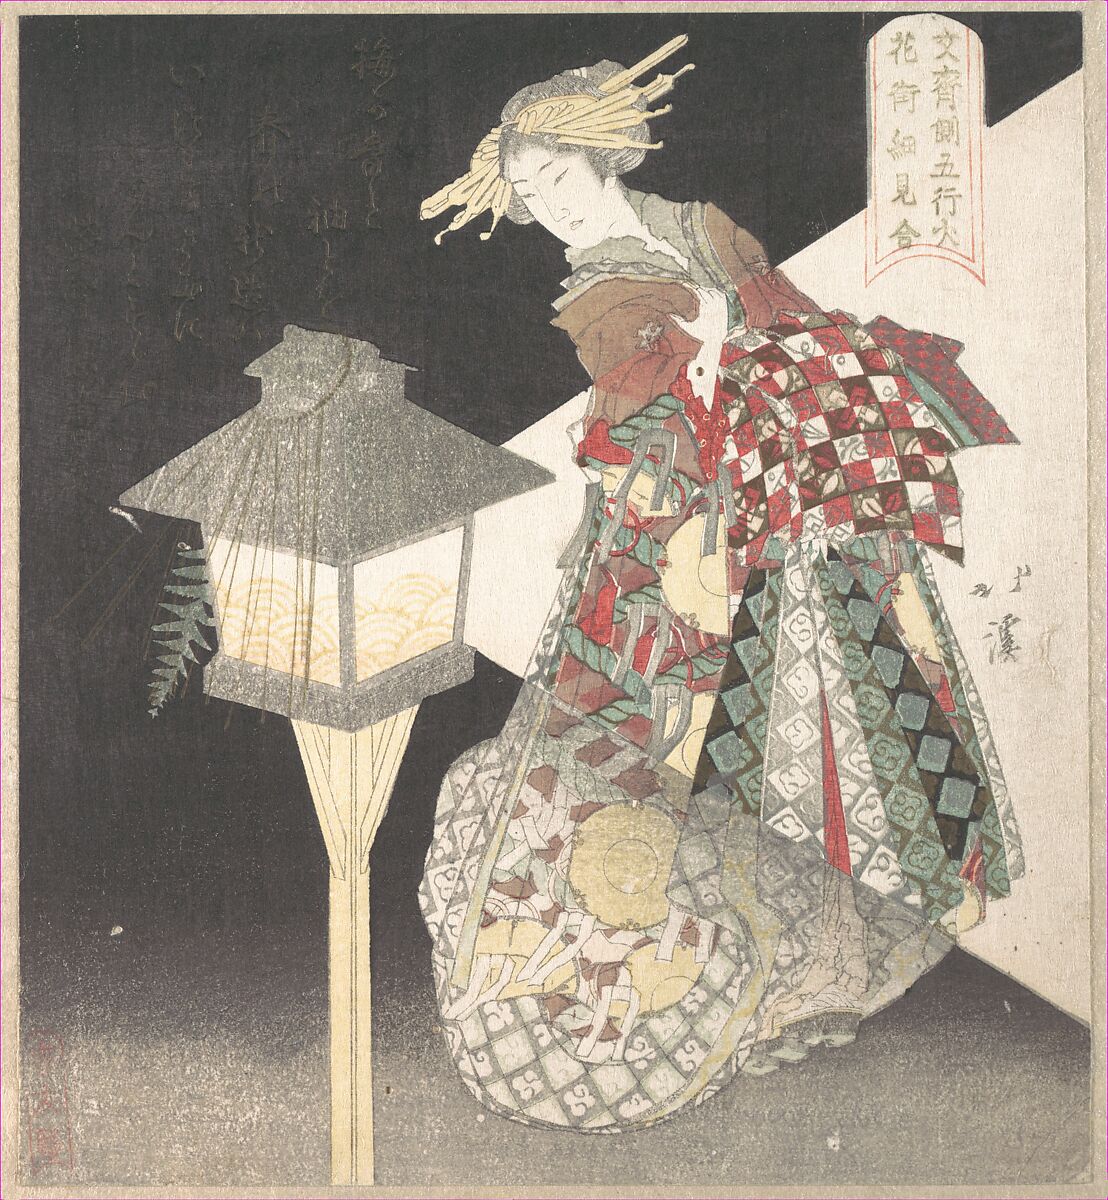 Courtesan by a Lantern, “Fire,” from the series Five Elements for the Bunsai Poetry Group, a Guide to the Yoshiwara Pleasure Quarters, Totoya Hokkei (Japanese, 1780–1850), Woodblock print (surimono); ink and color on paper, Japan 